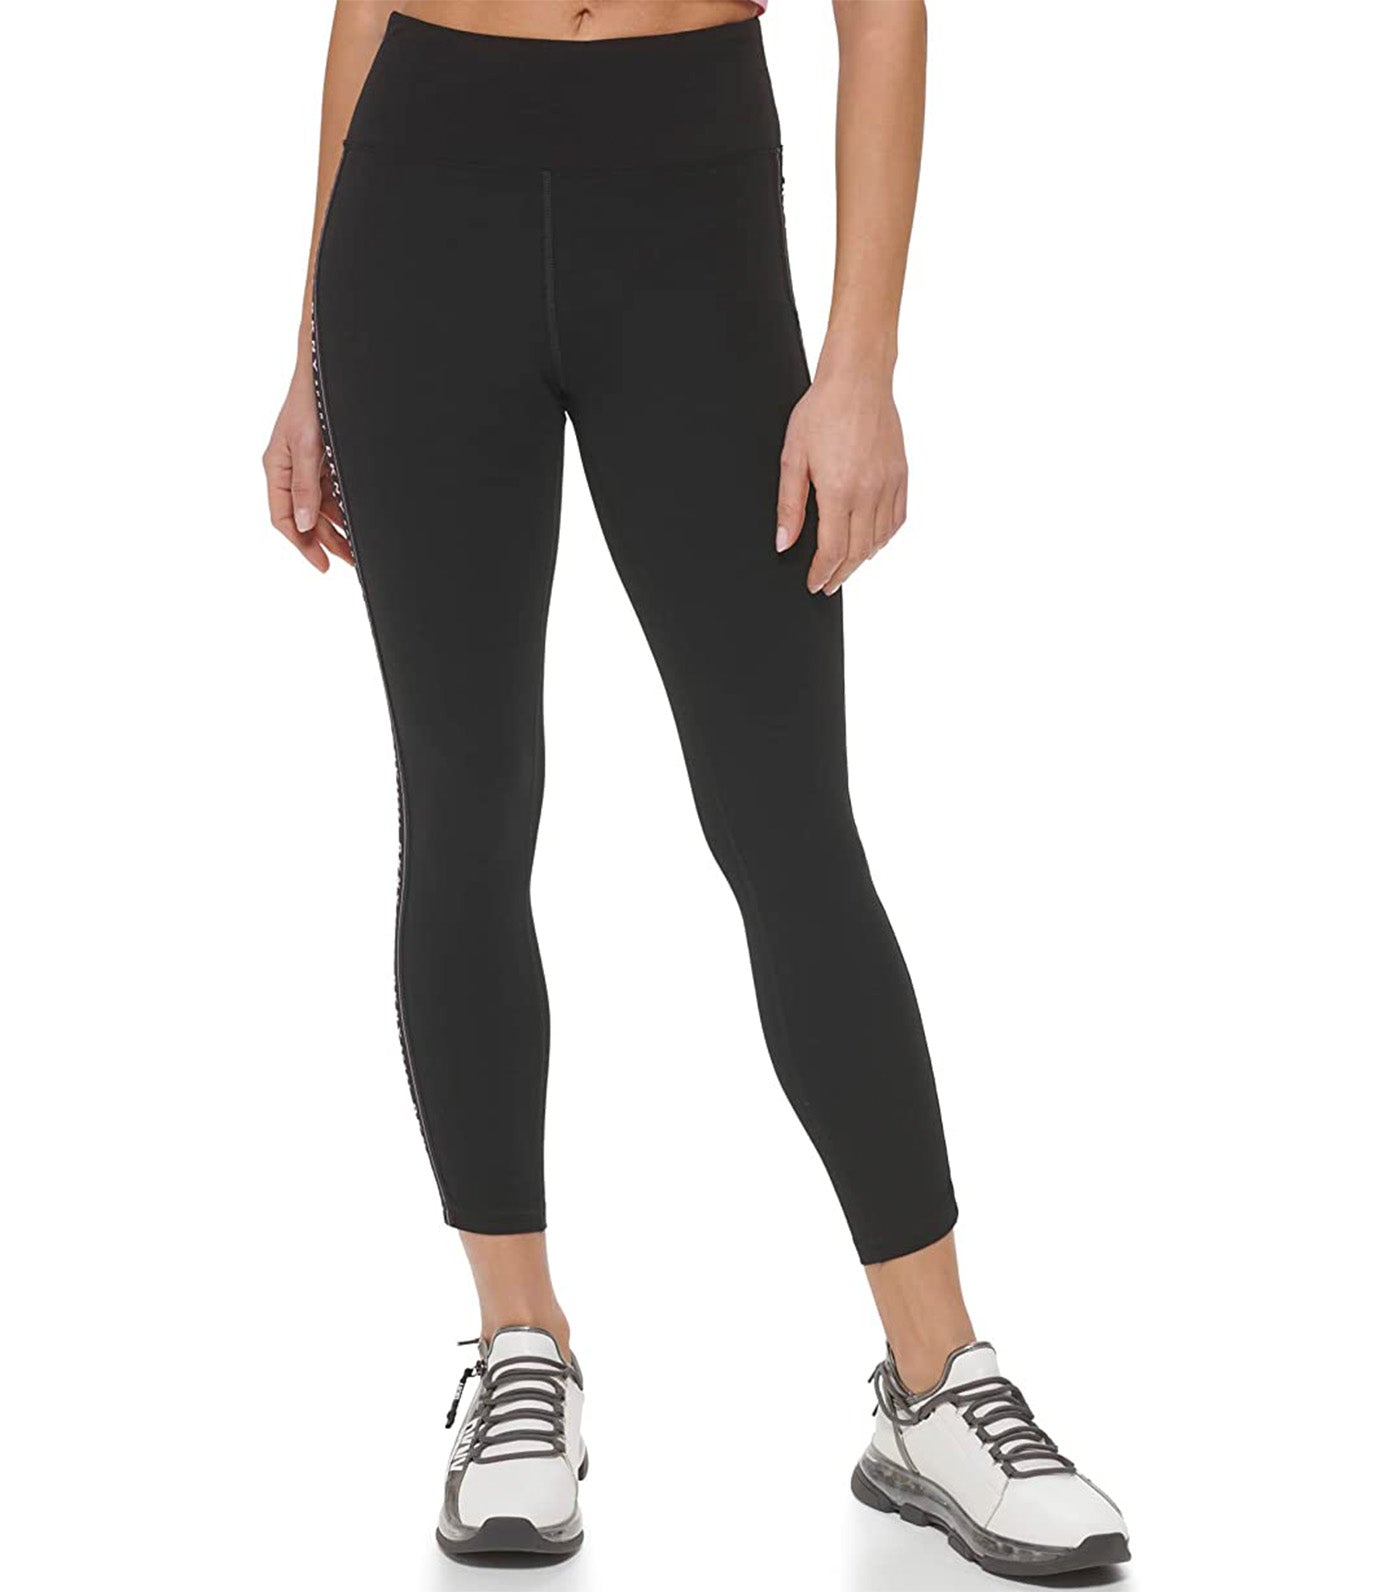 Shop Dkny Women's High Waisted Leggings up to 75% Off